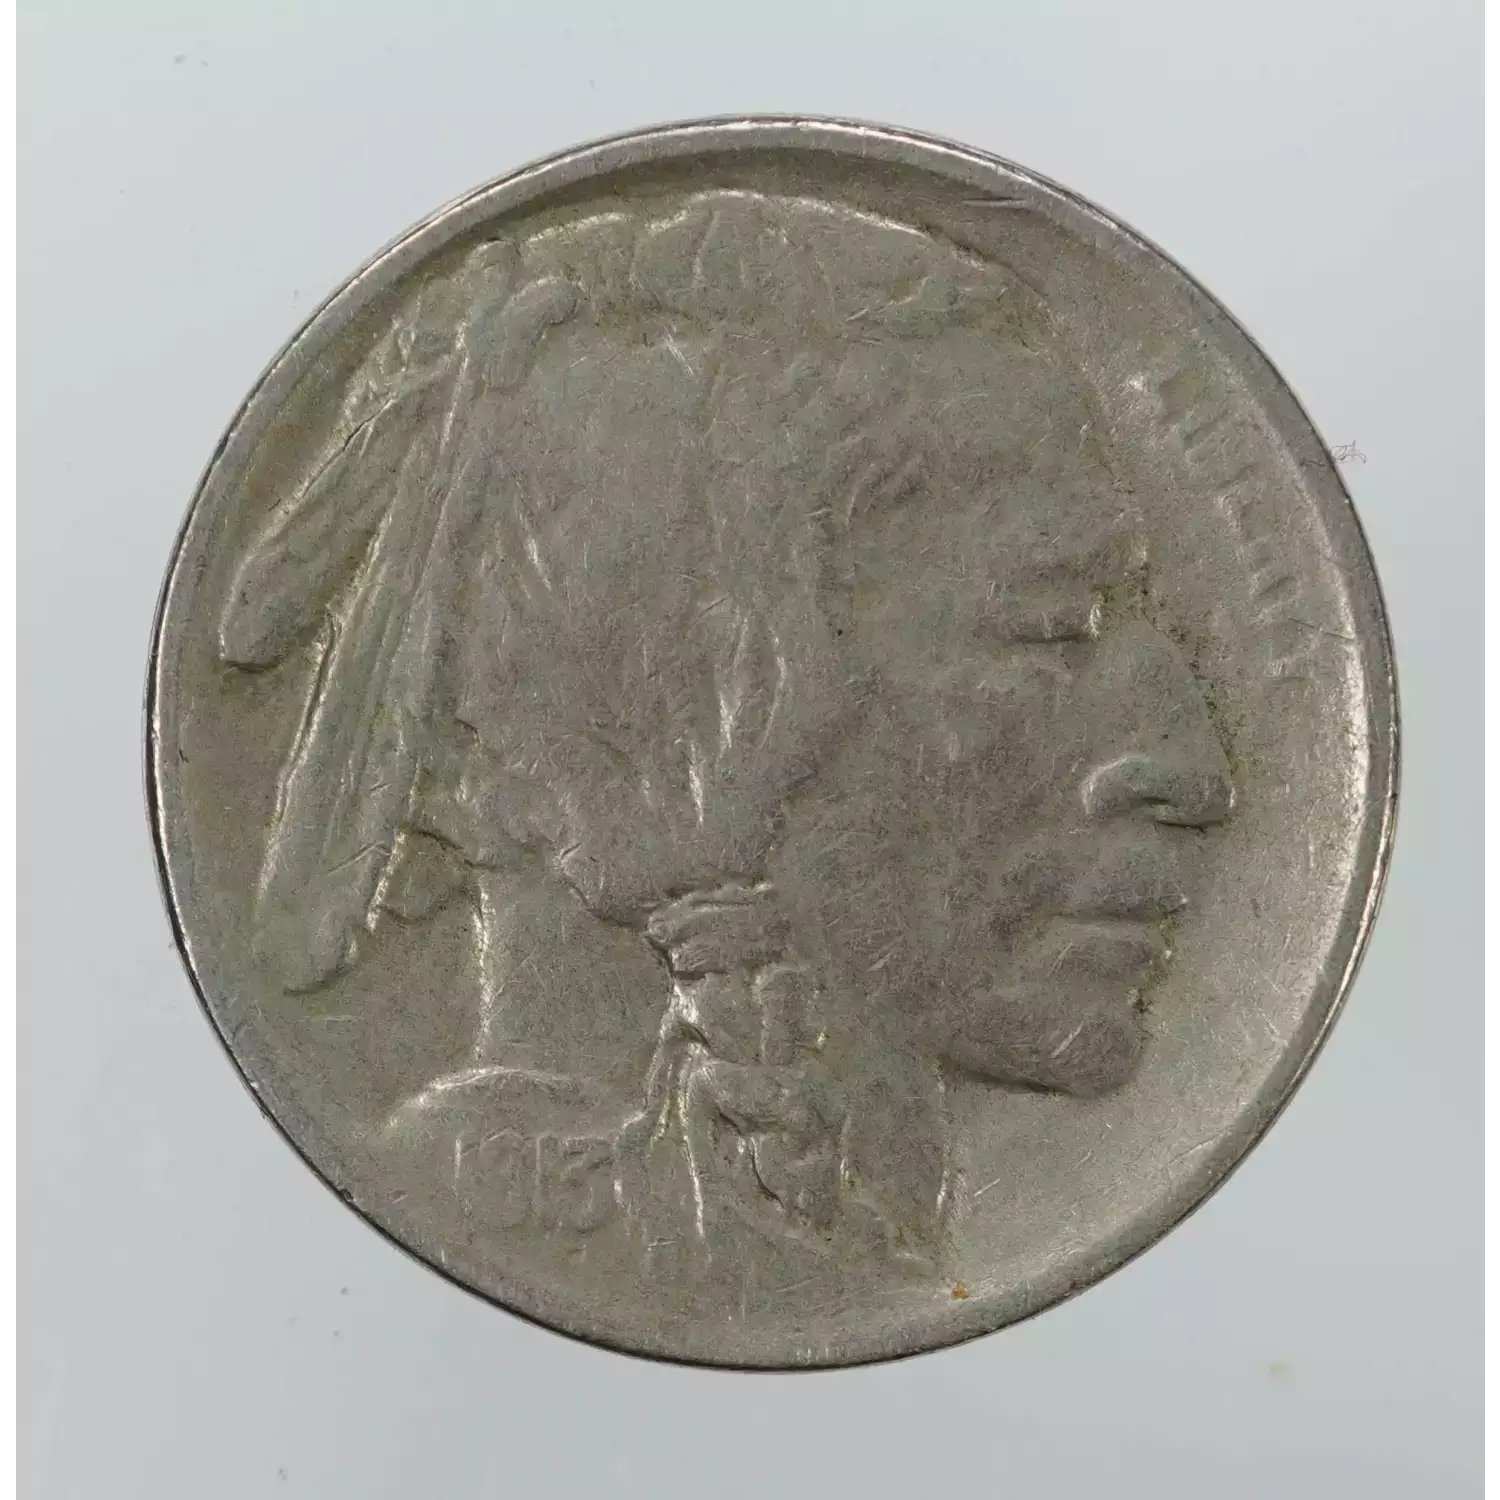 Nickel Five Cent Pieces-Indian Head or Buffalo